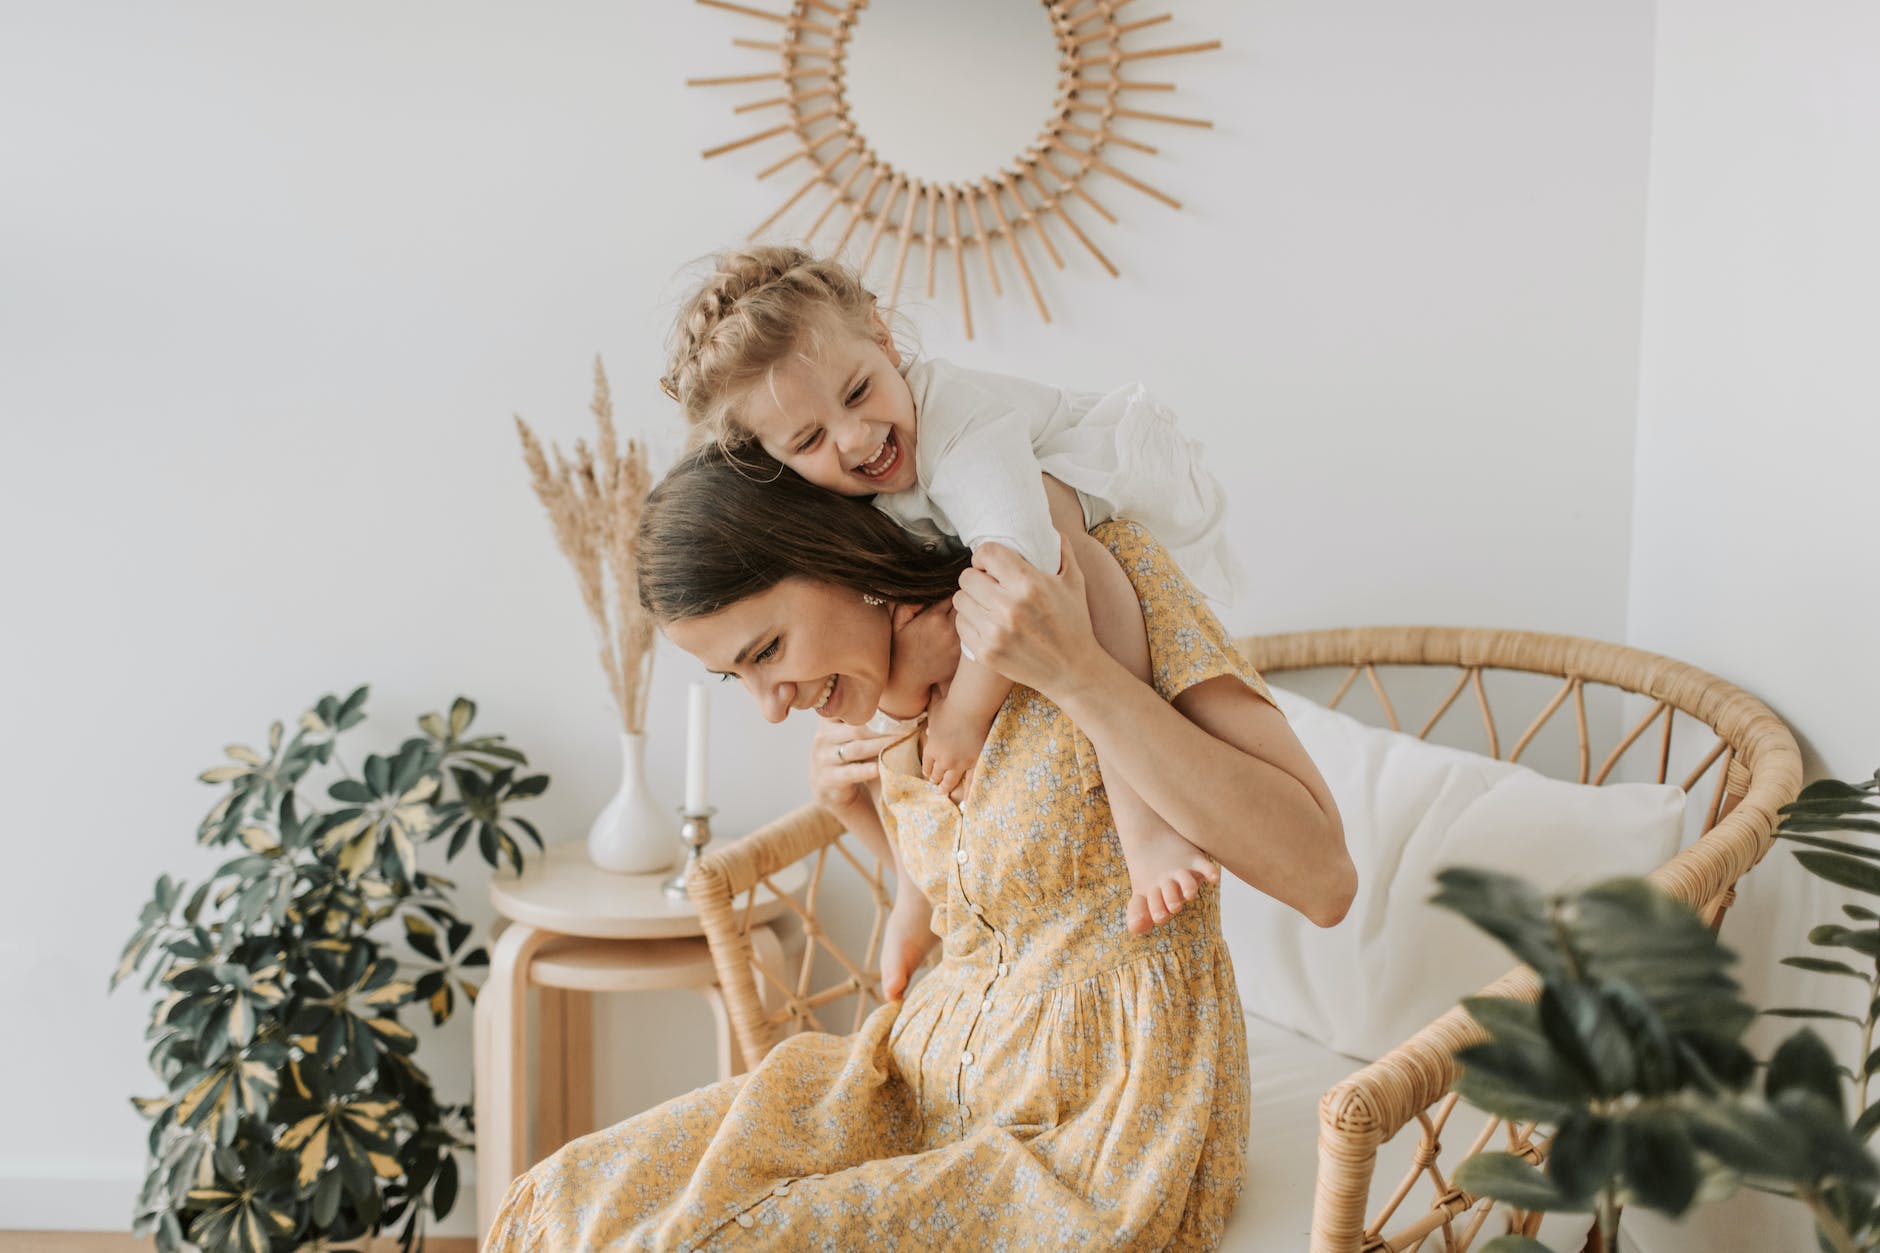 woman in yellow floral dress with baby girl hugging her